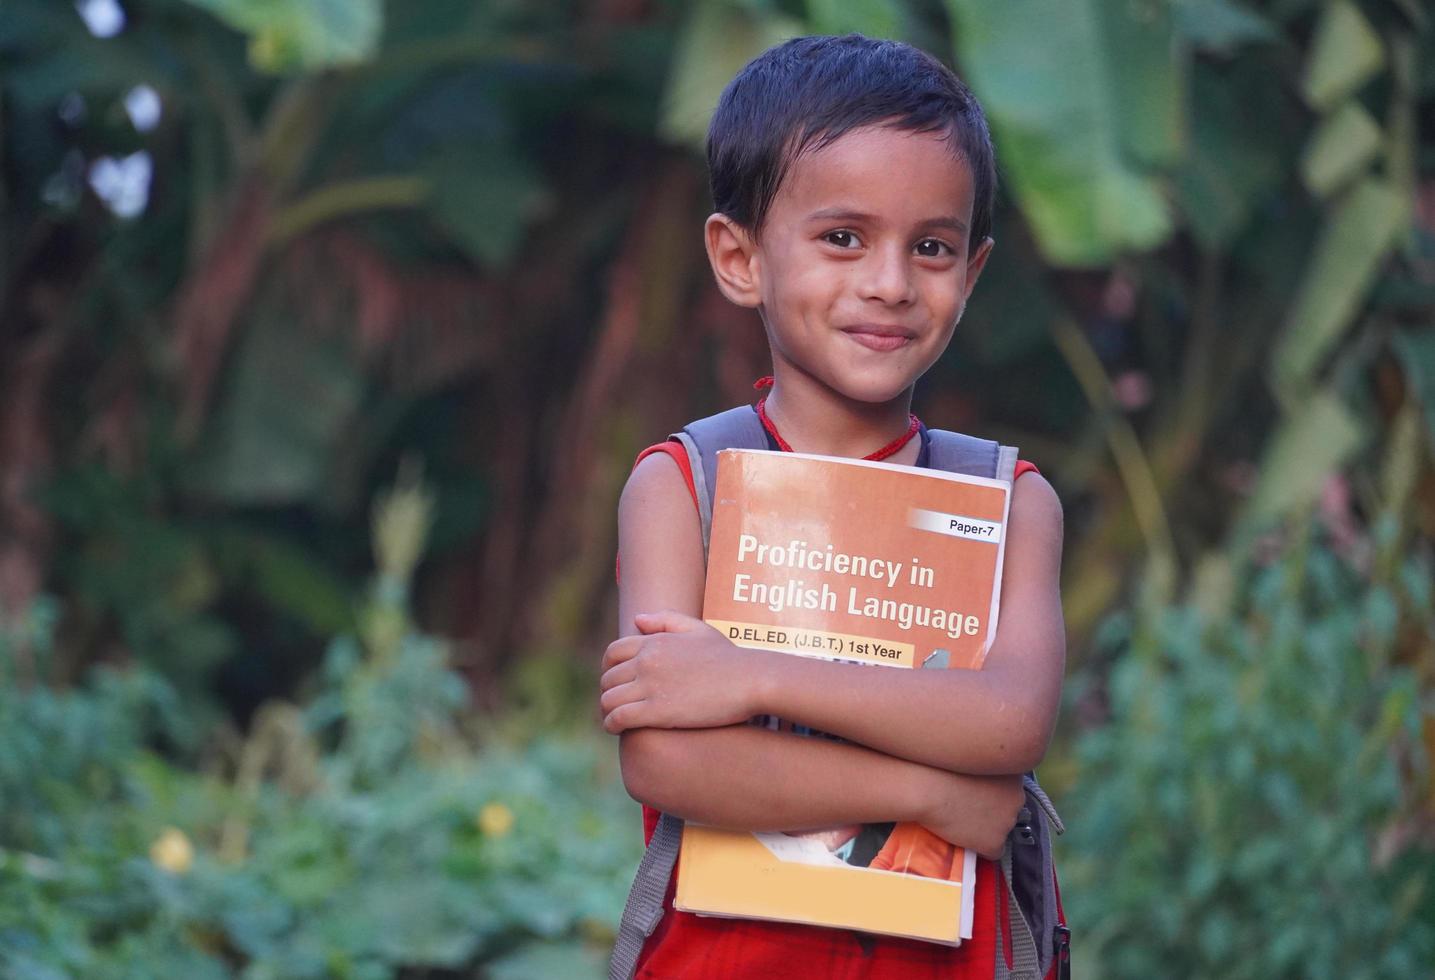 A student kid with books - child education concept photo